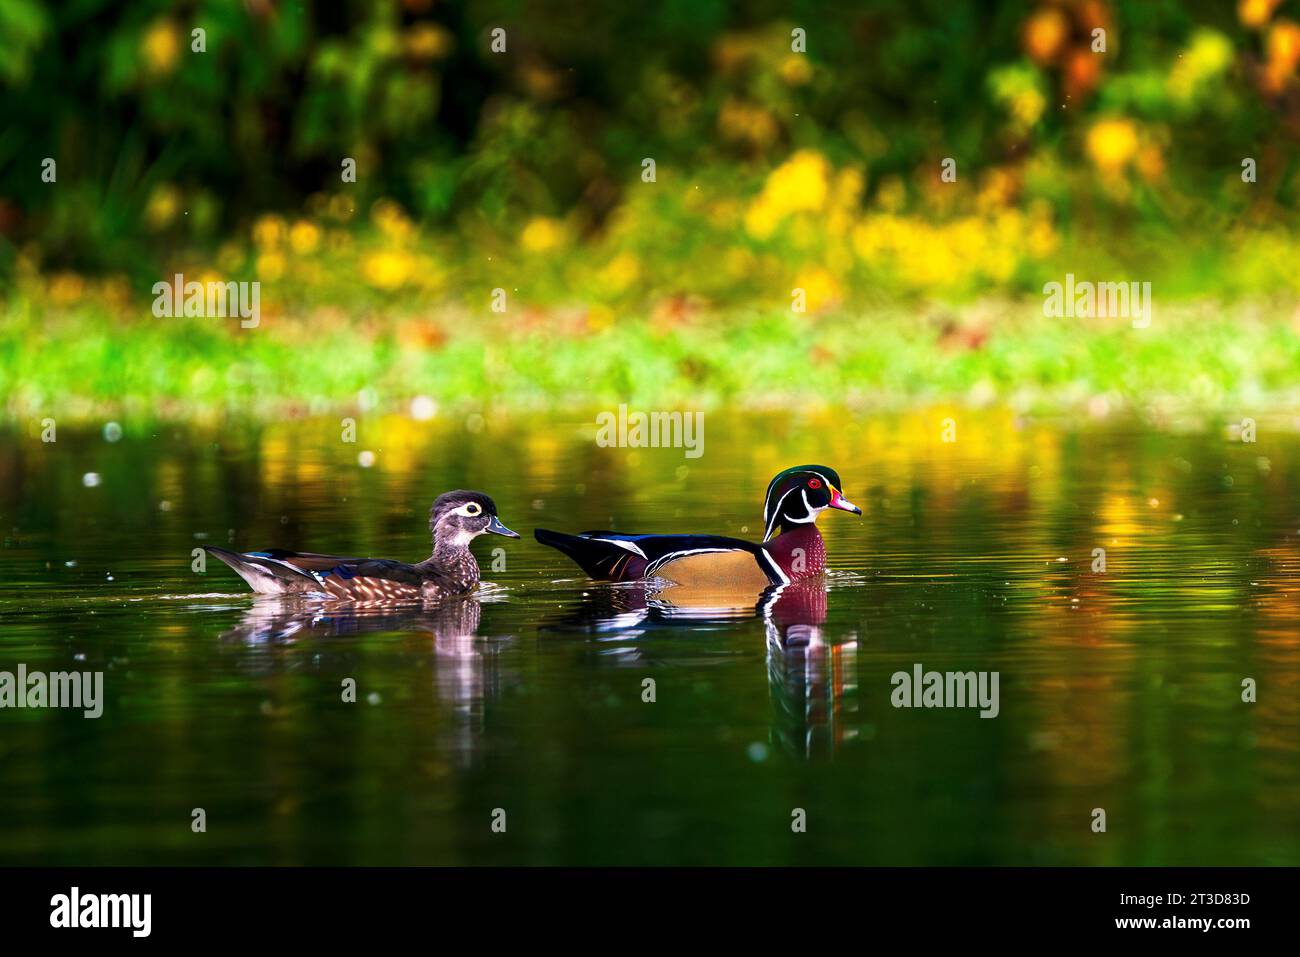 A Pair of colorful Wood Ducks paddles on the calm surface of a lake. These are medium-sized ducks that perch and nest in trees, usually near water. Stock Photo